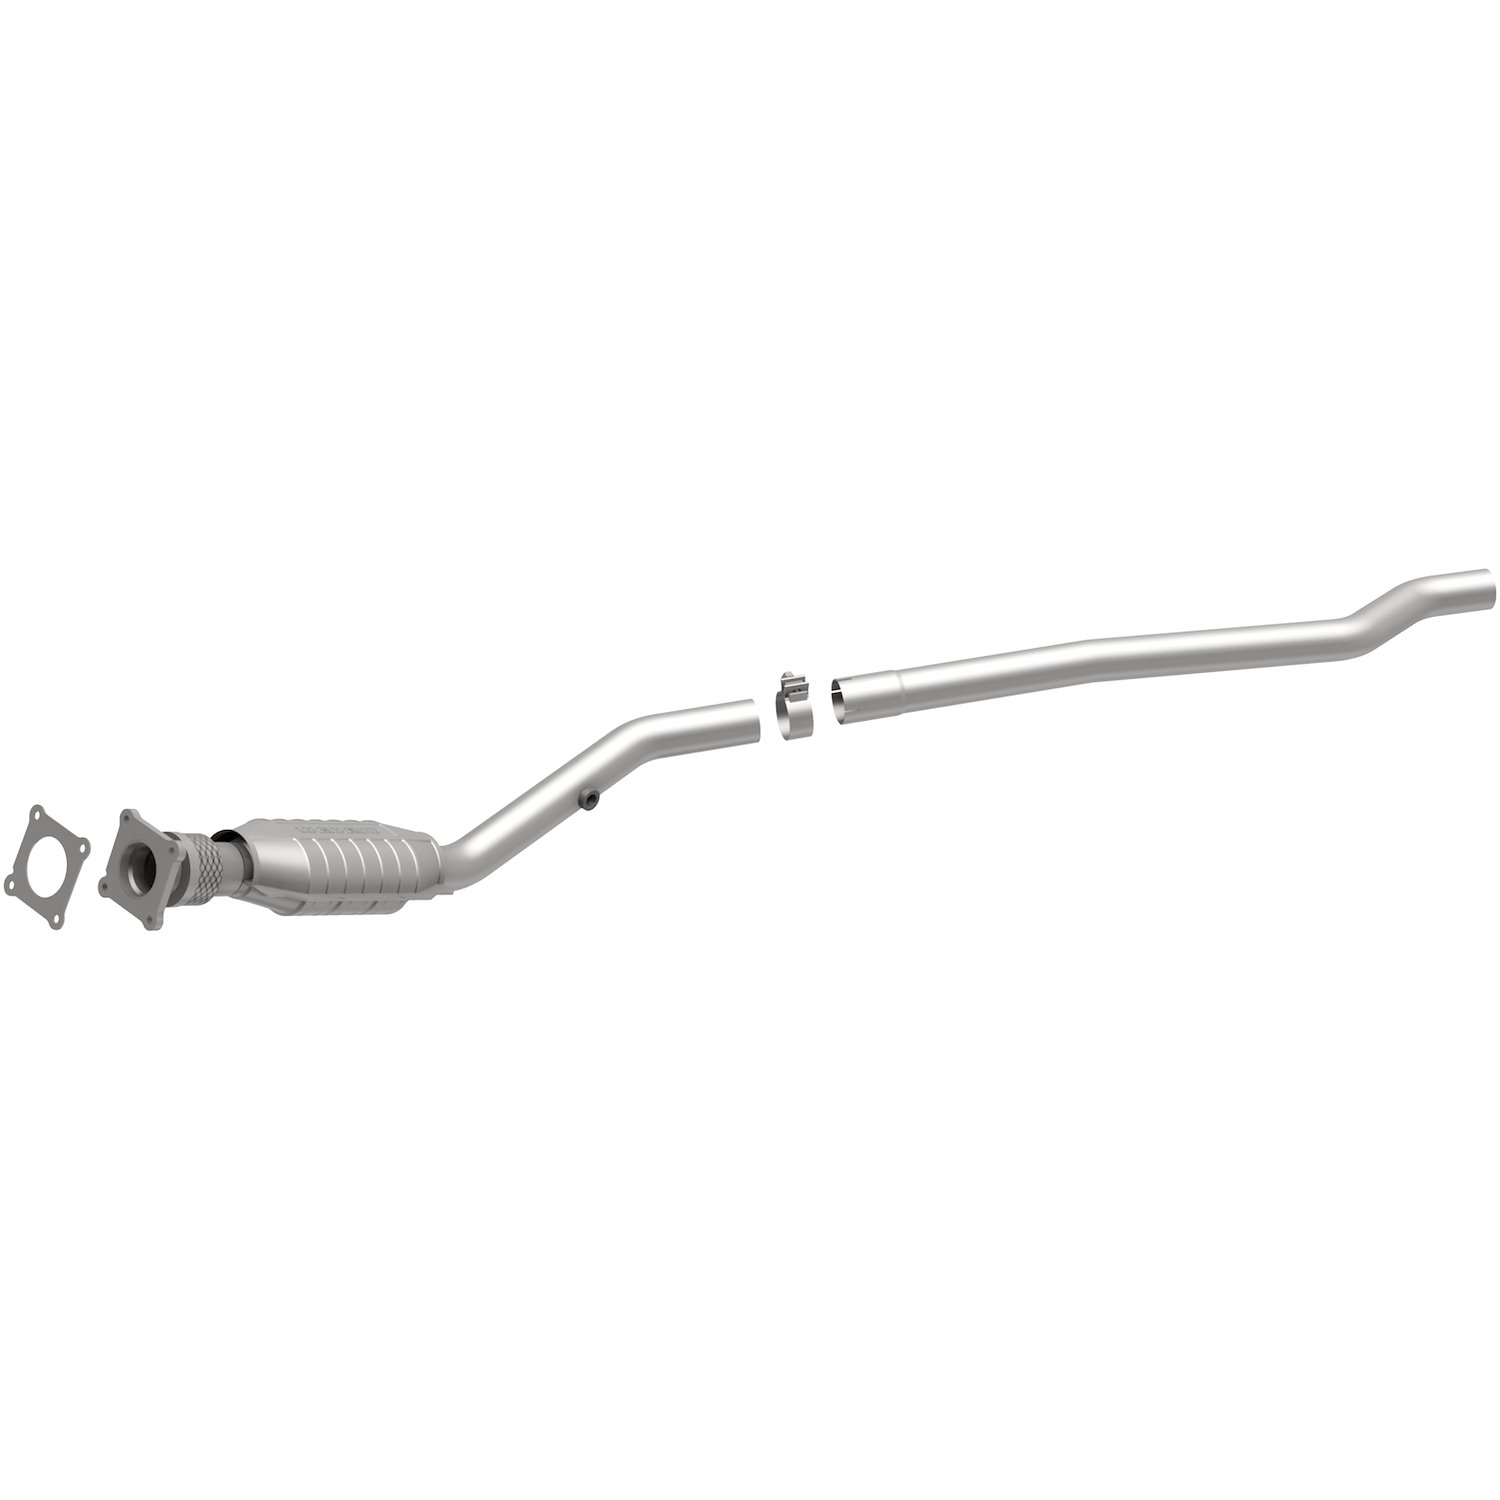 HM Grade Federal / EPA Compliant Direct-Fit Catalytic Converter 93279